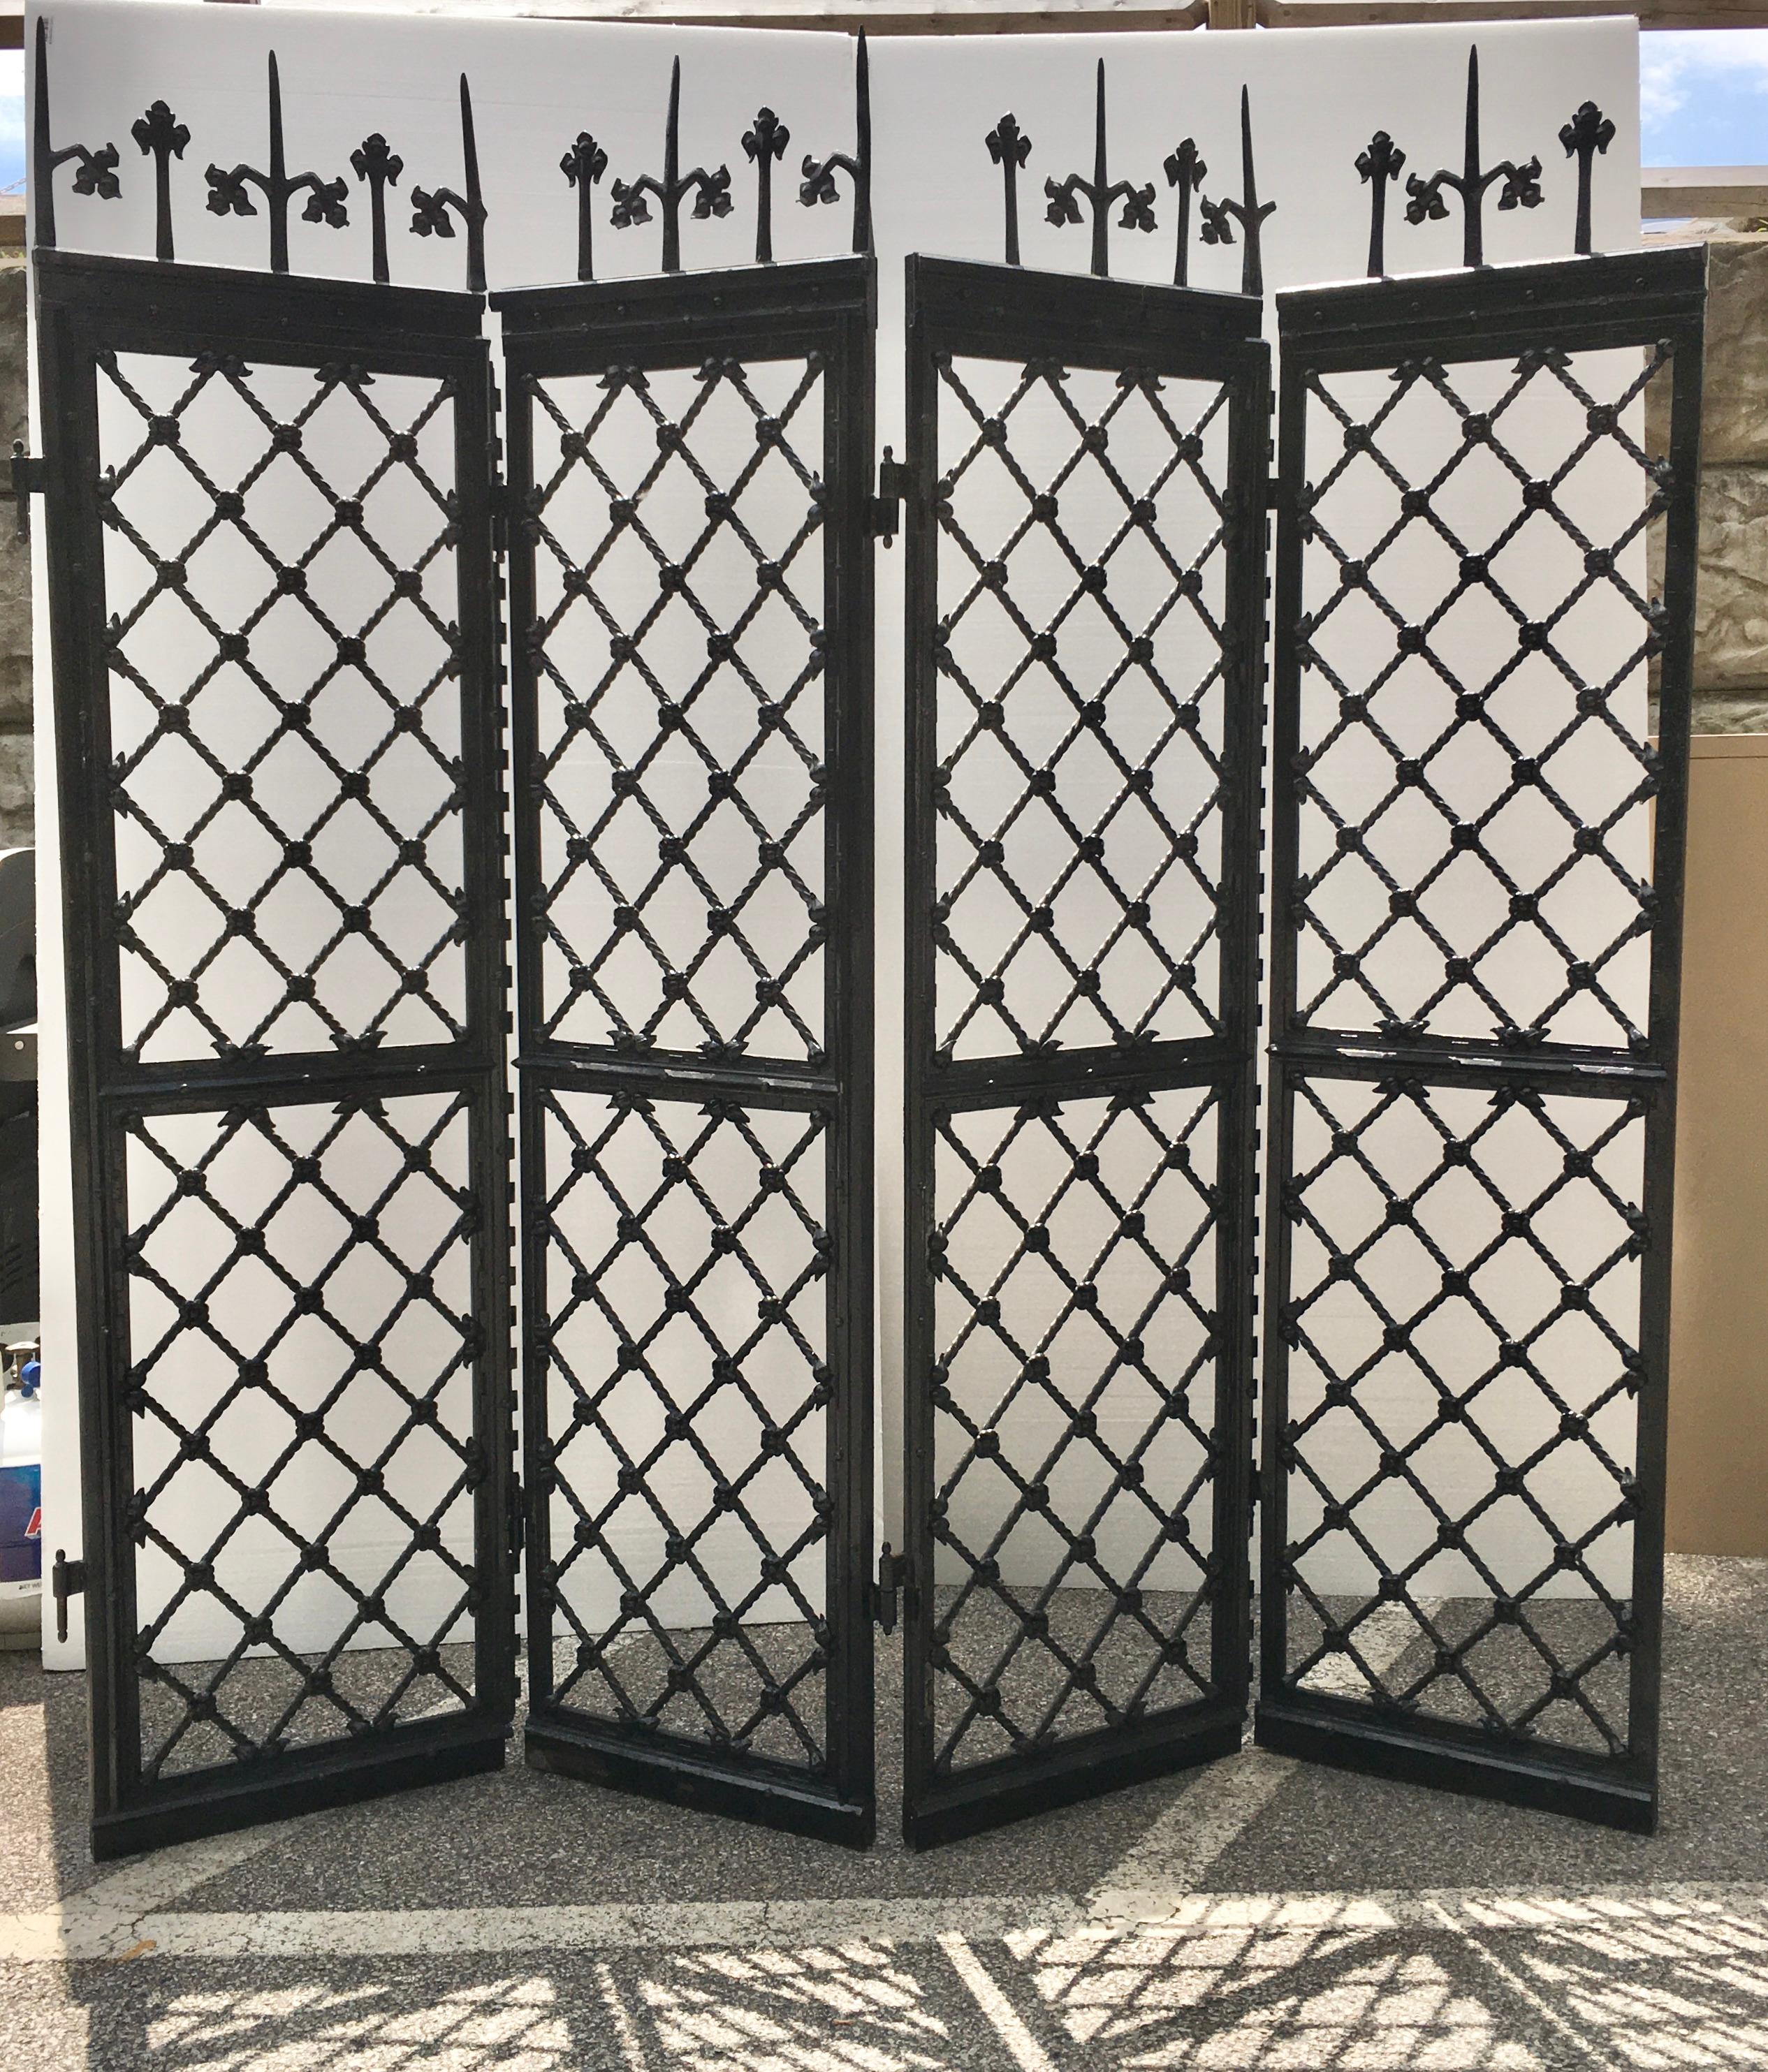 Gothic Revival Wrought Iron Architectural Four-Panel Screen